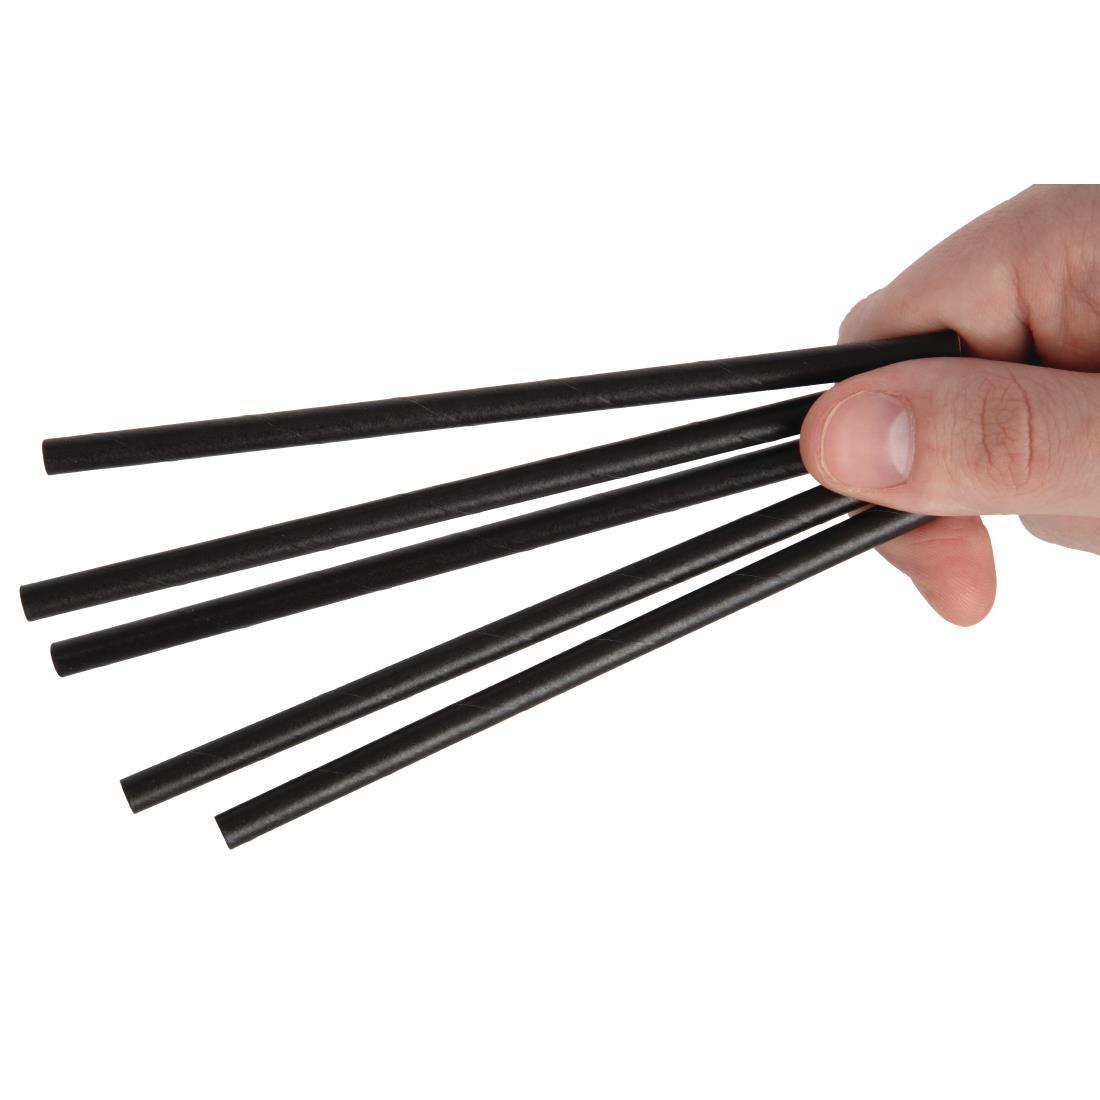 Fiesta Compostable Paper Cocktail Stirrer Straws Black (Pack of 250) - CY080  - 5